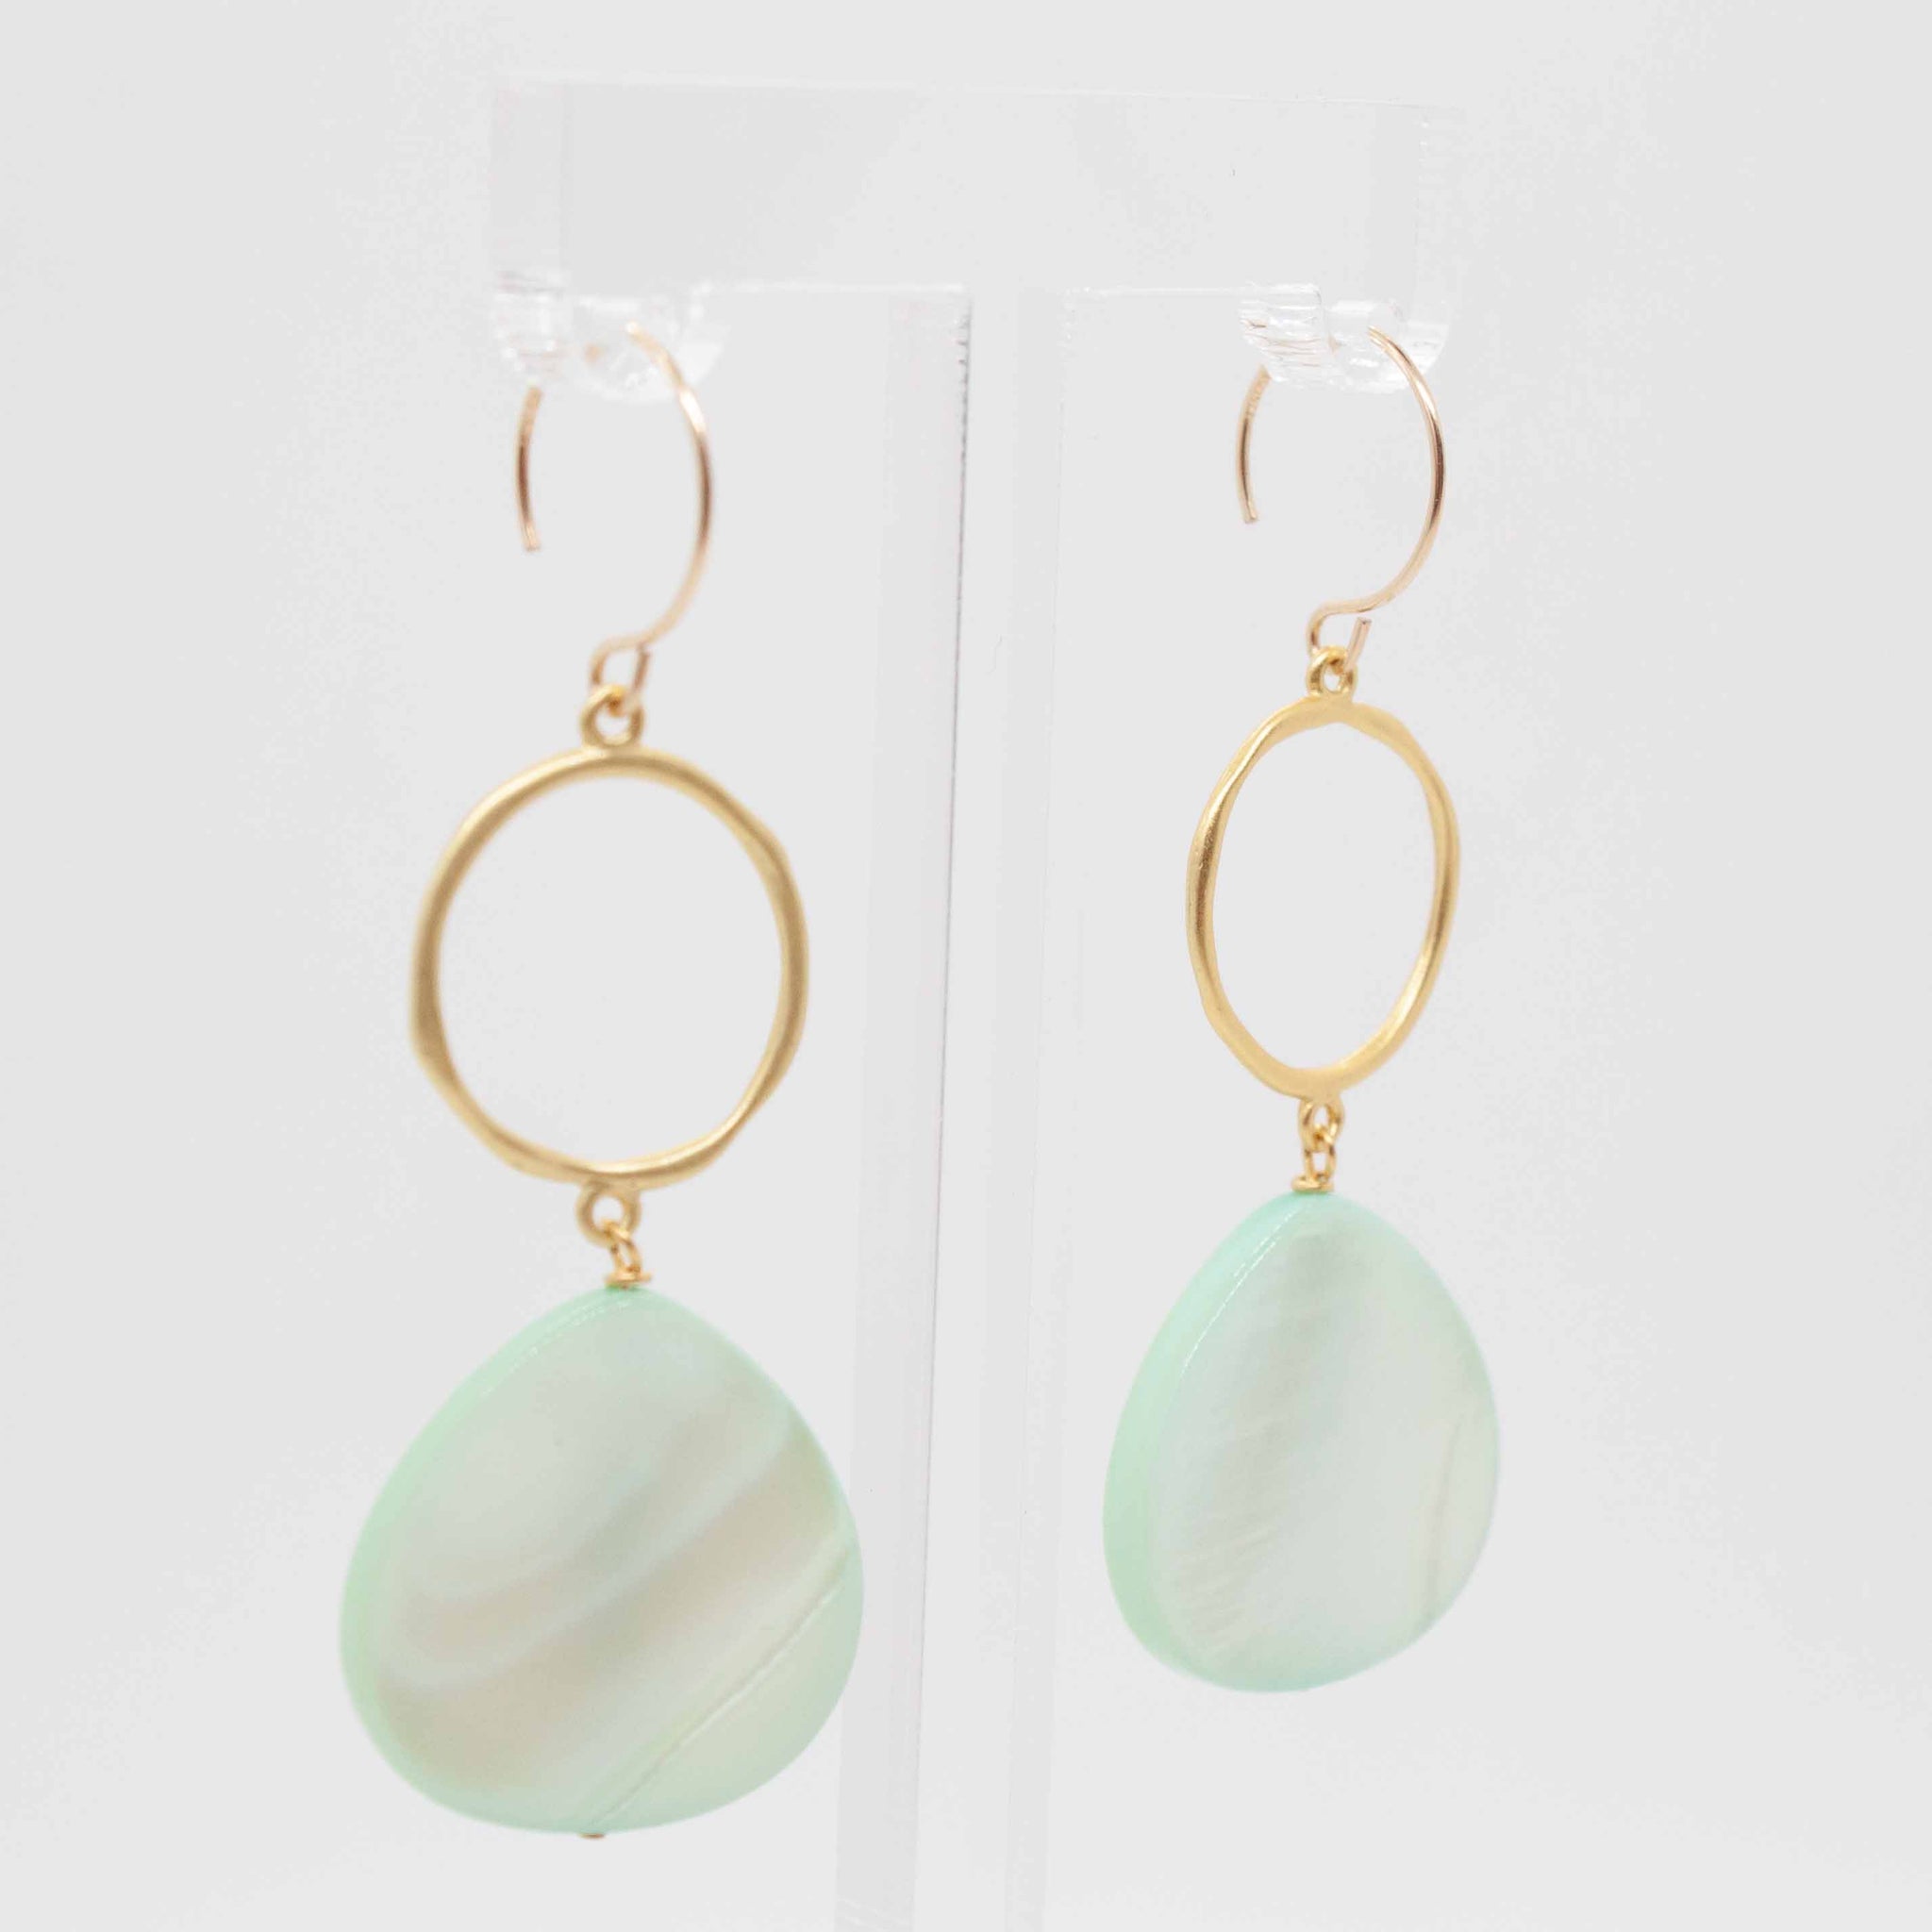 If we can't go to the beach (yet!), let's at least feel like we're there! Put on these luscious shell earrings, crush yourself some mint and enjoy a mojito!  2" mint shell earrings with gold vermeil circle charm and gold filled earrings hooks. Made in Toronto by kp jewelry co.